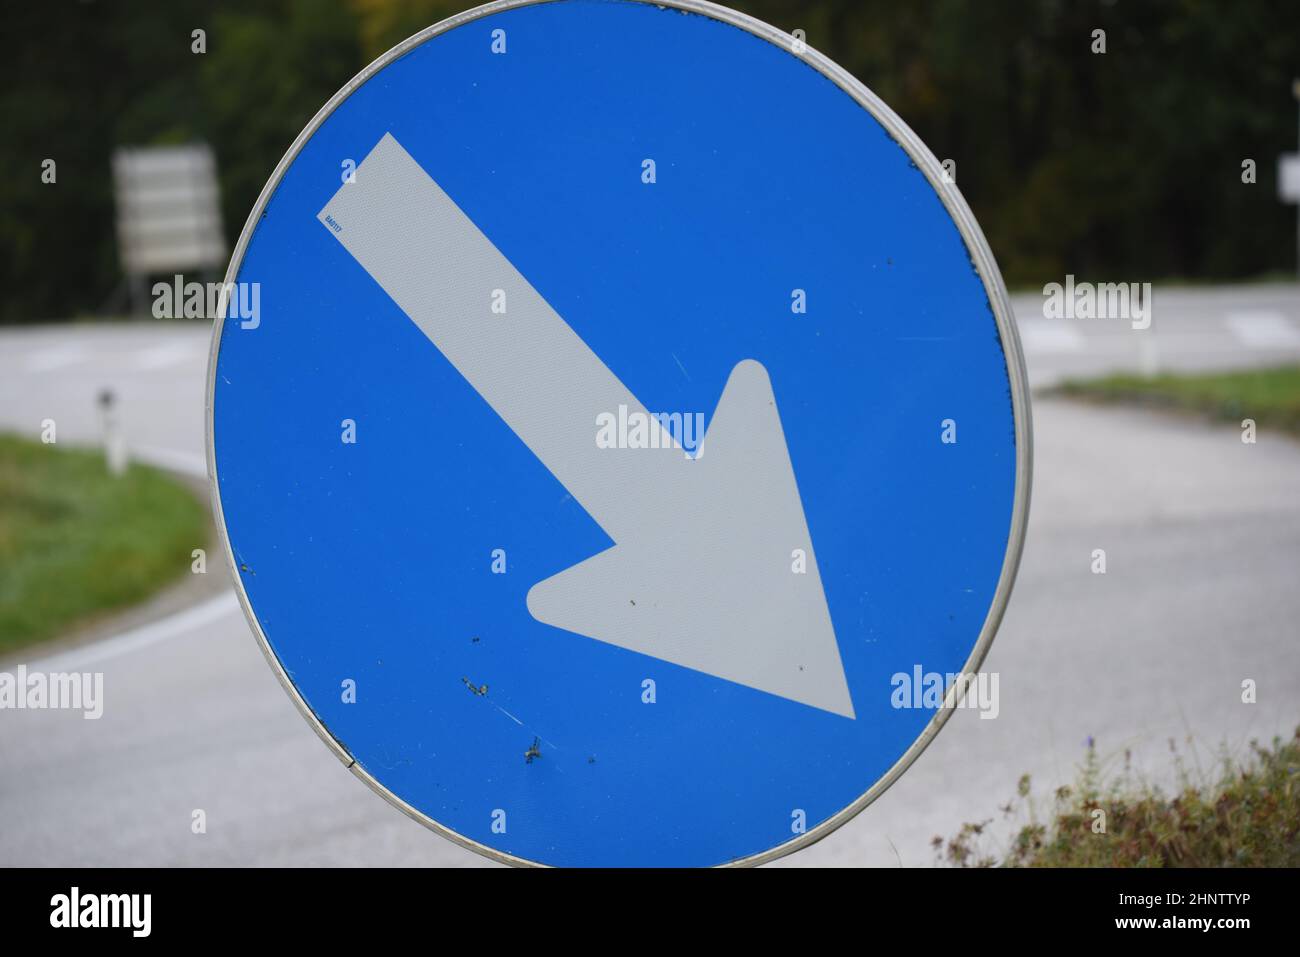 Direction sign with arrow showing the way in road traffic Stock Photo